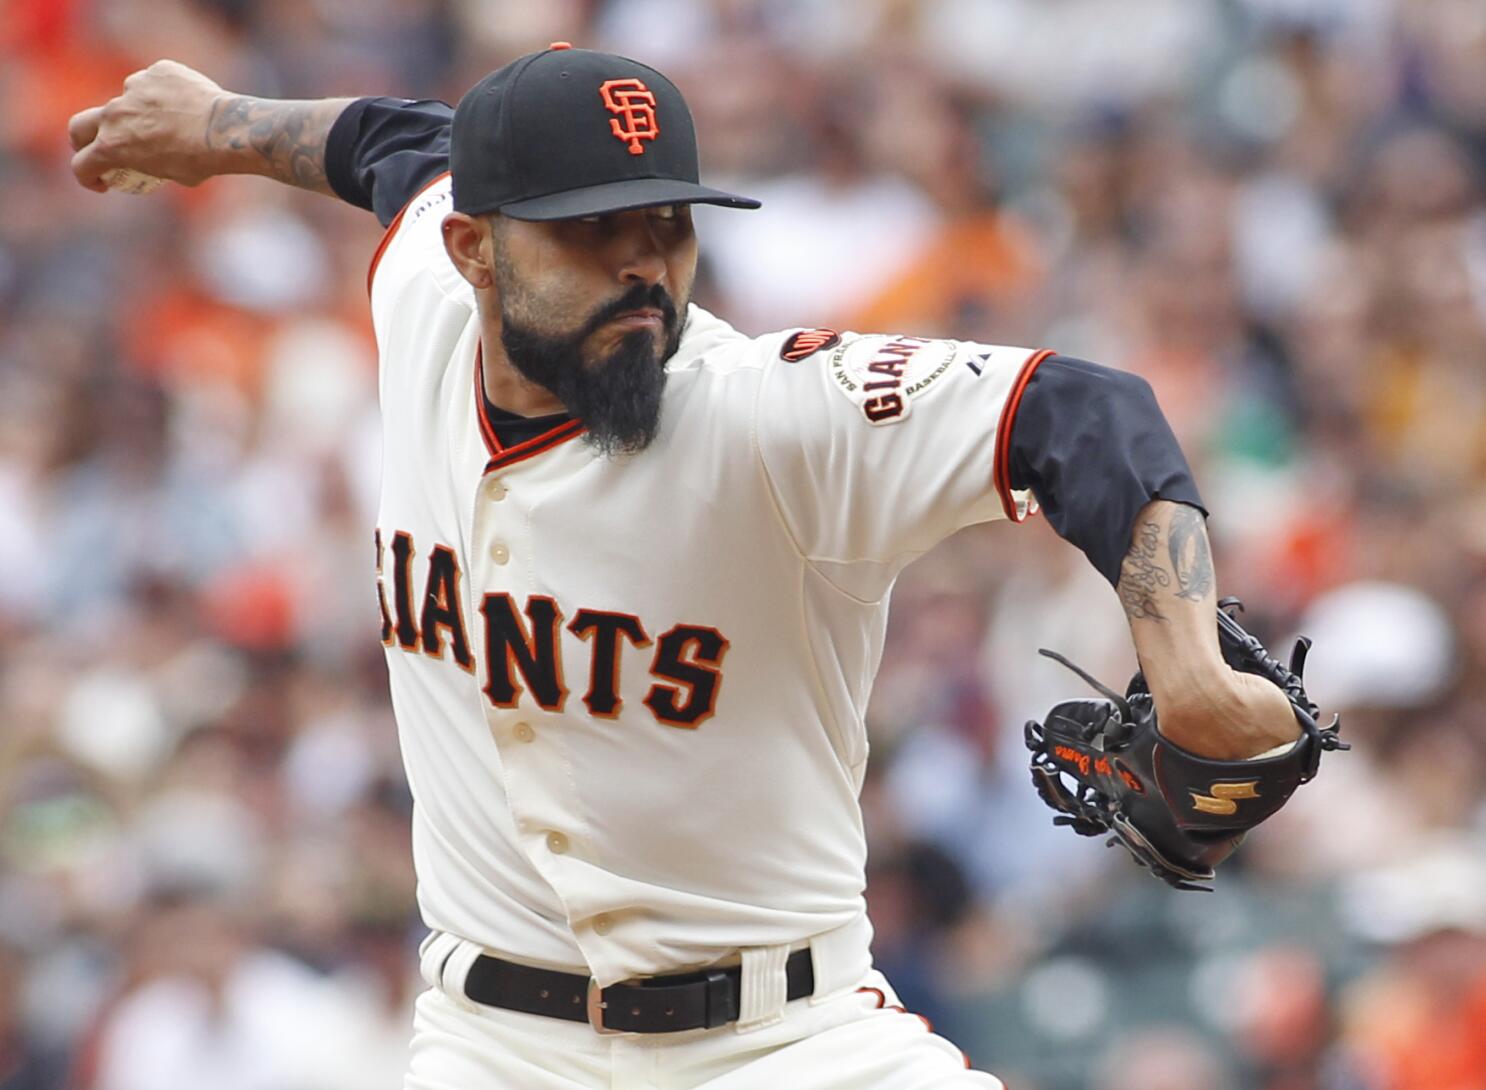 Giants all-time best relief pitchers